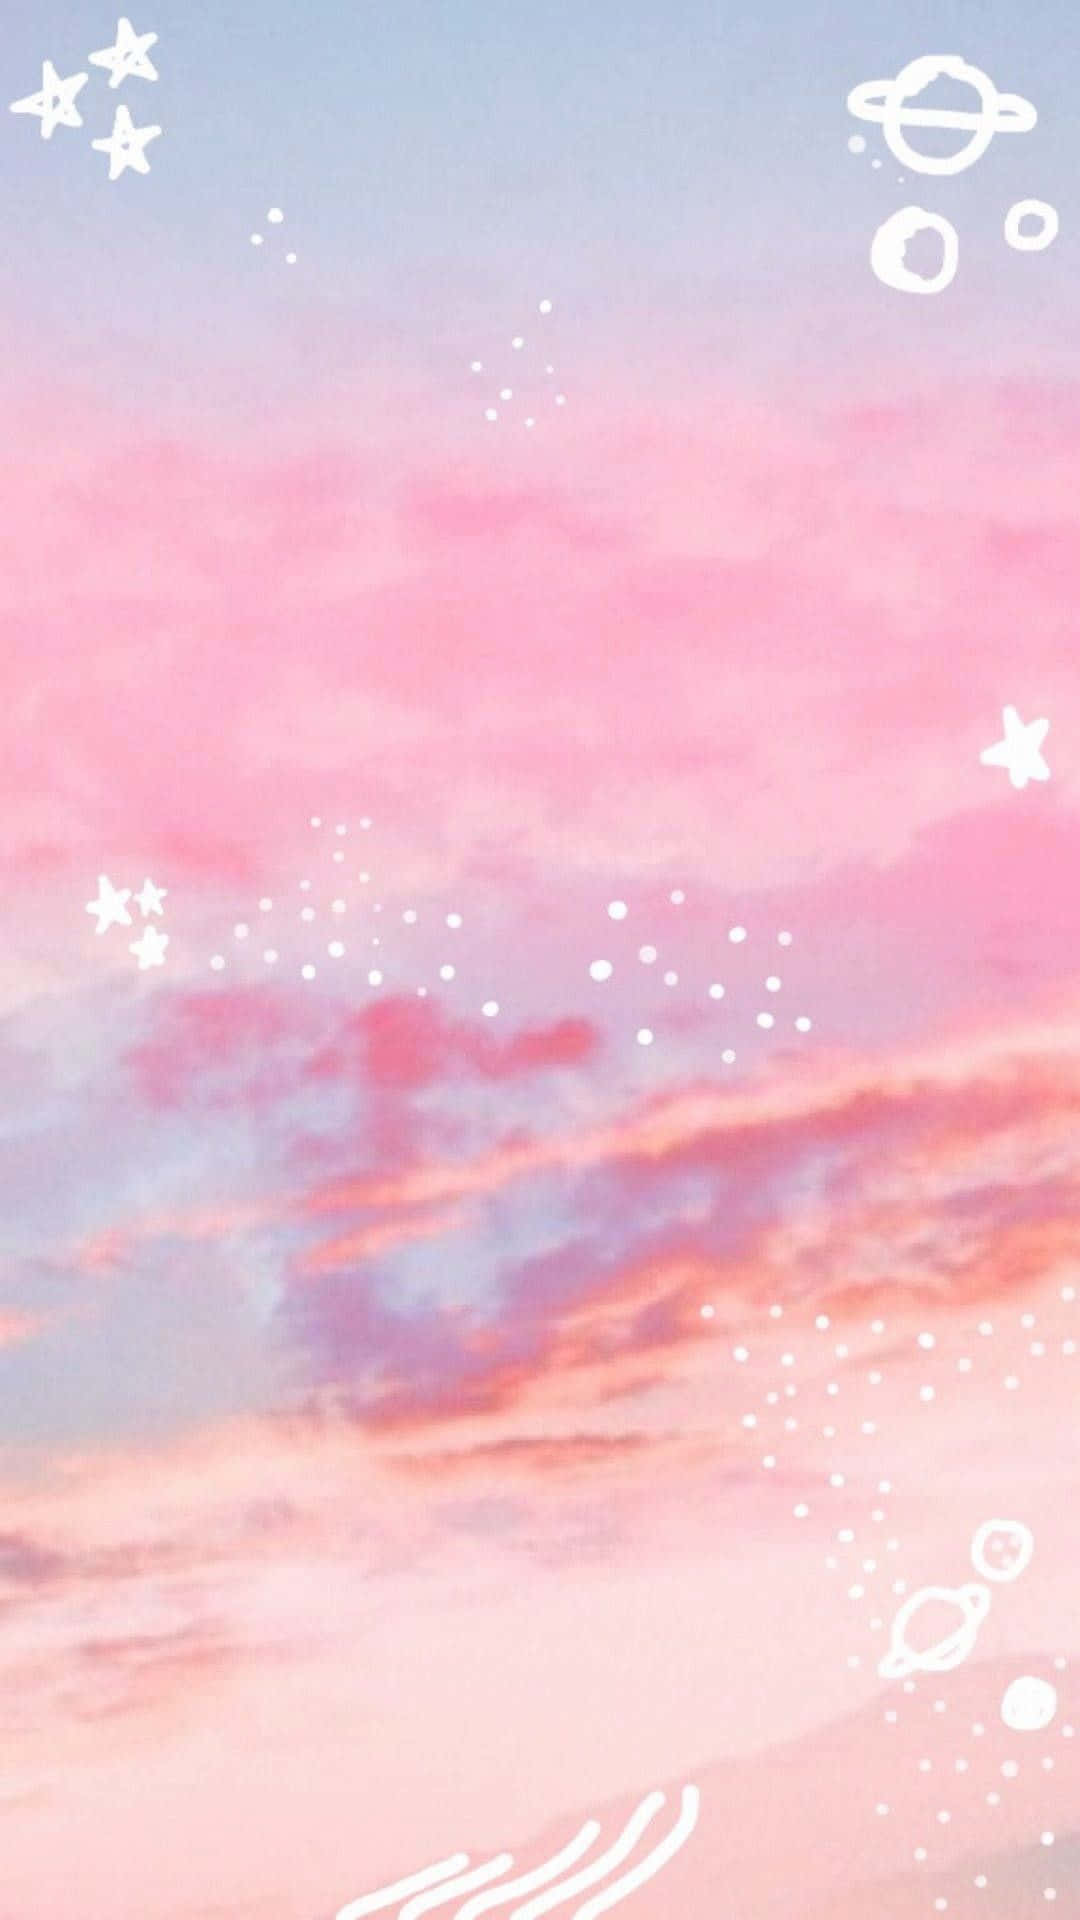 "A Heavenly Pile of Soft and Sweet Pink Cotton Candy" Wallpaper